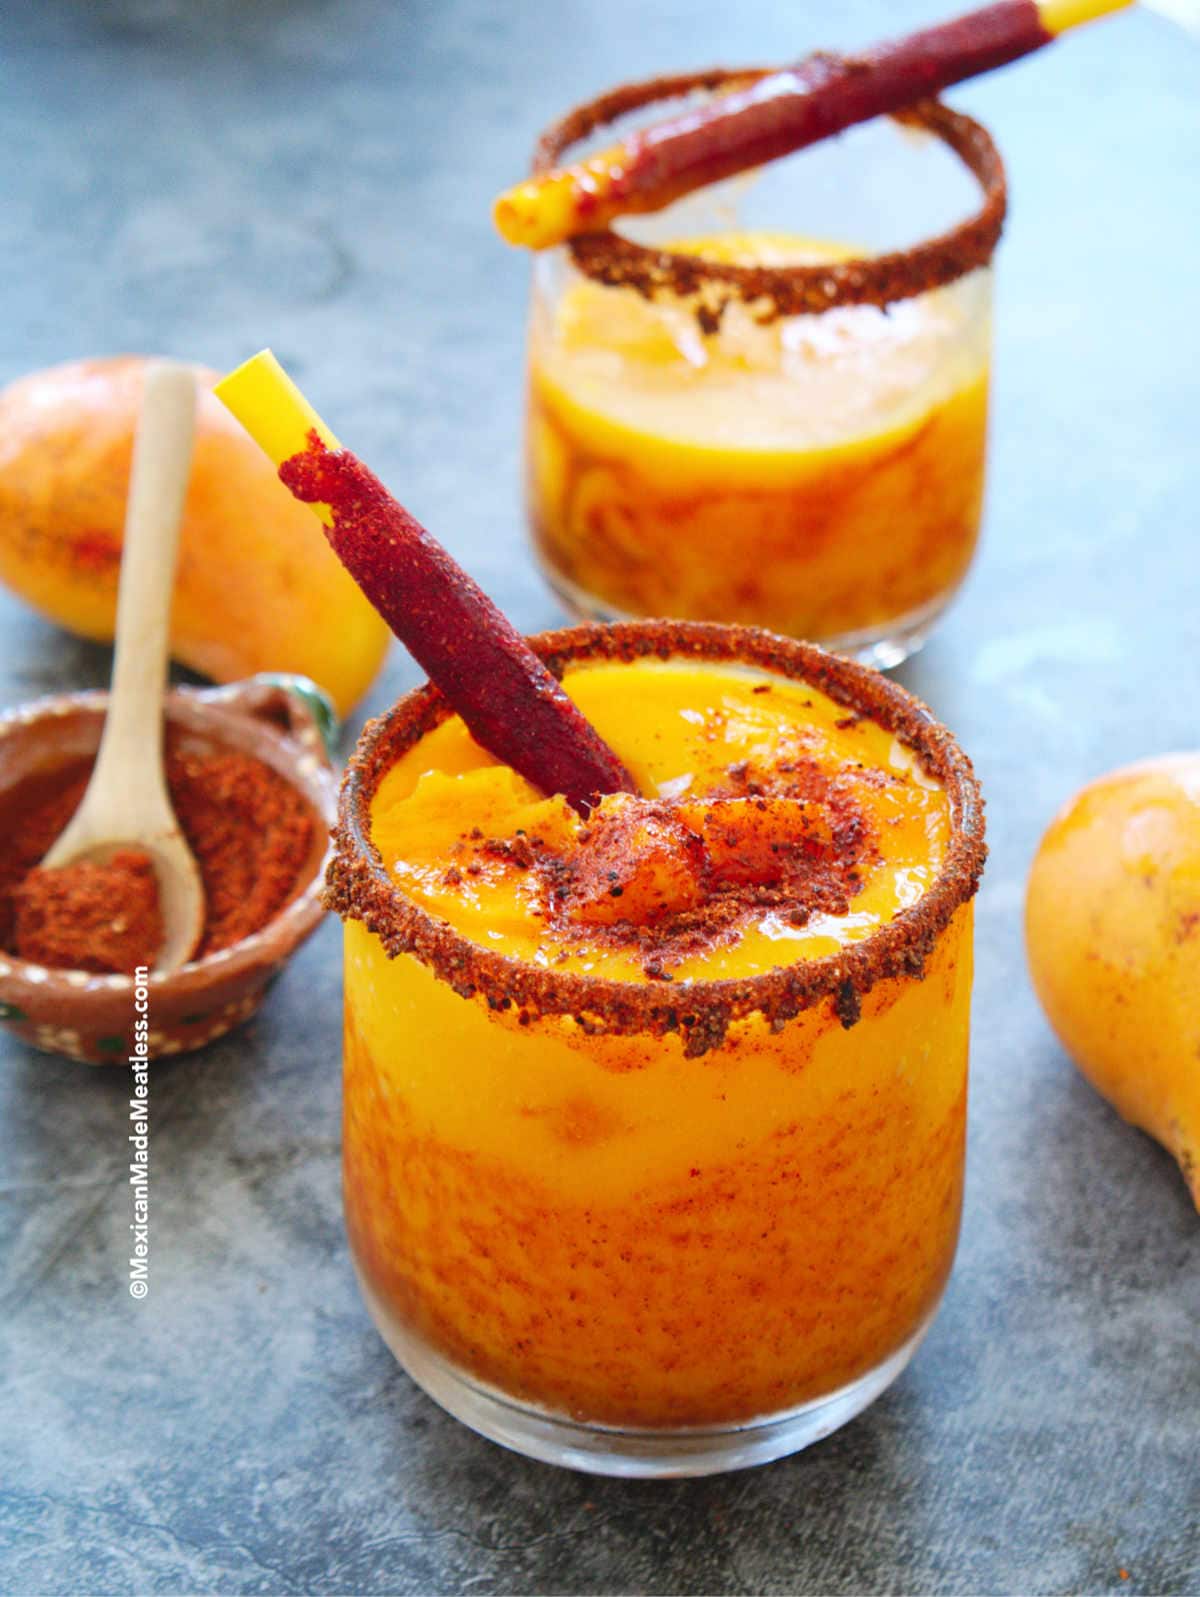 How to make mangonadas. This is a must try Mexican frozen mango treat!